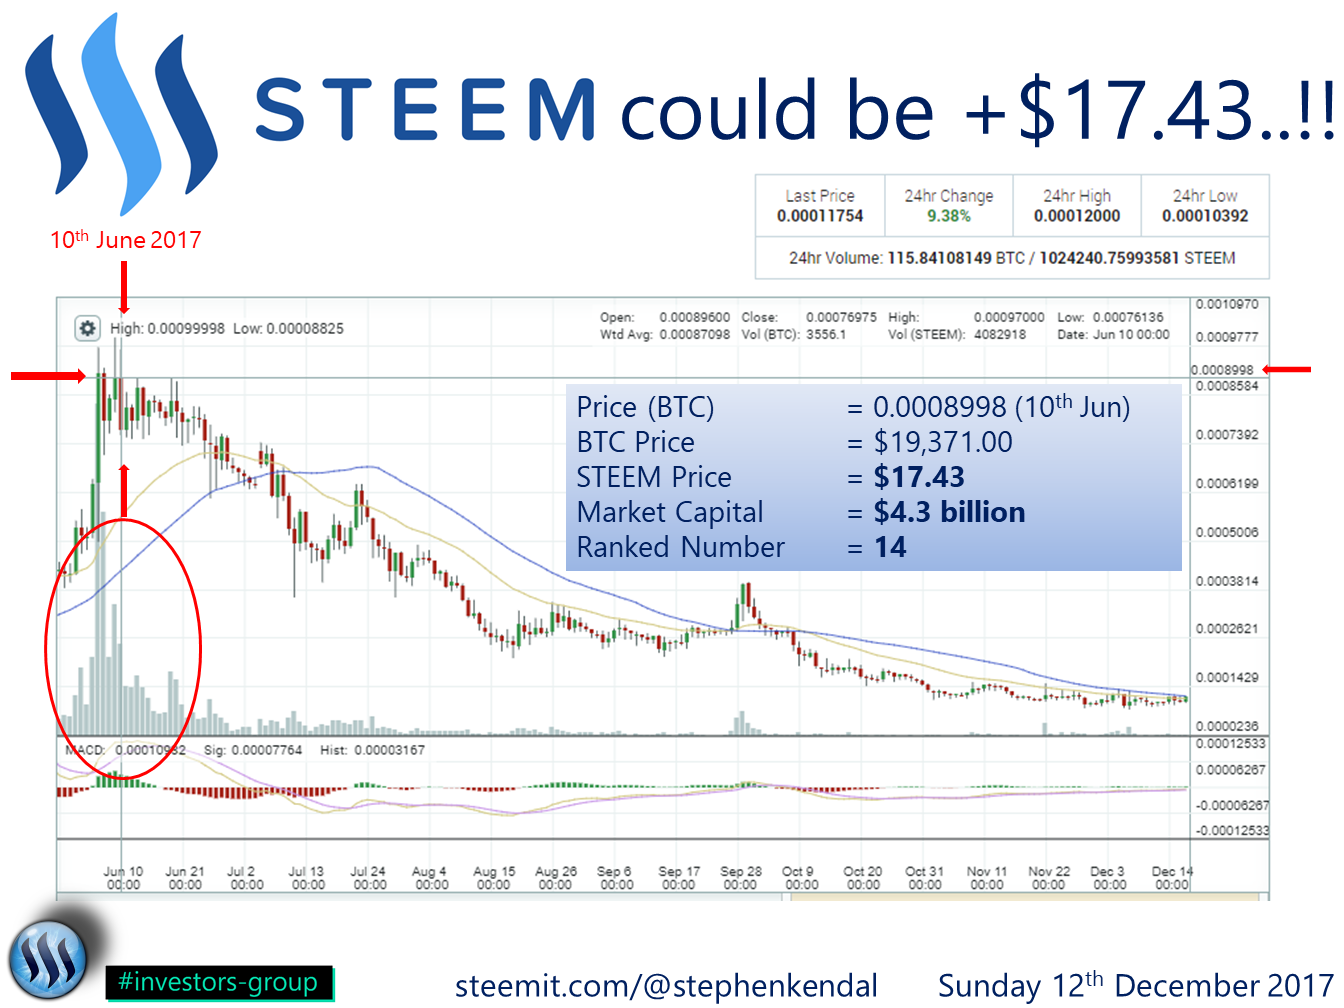 Steem could be +$17.43.png